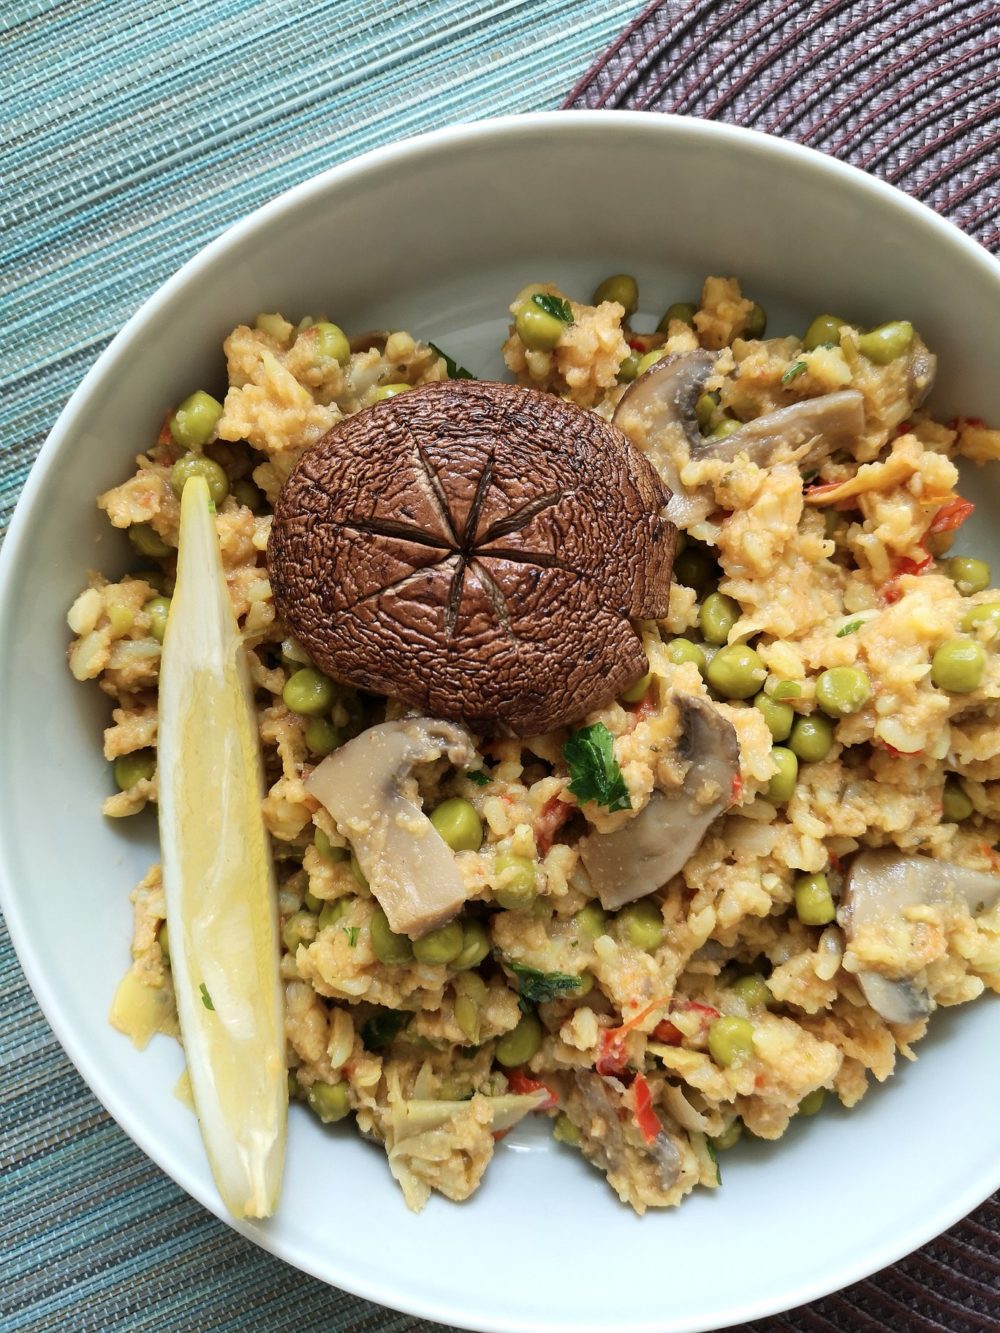 Vegan paella with mushrooms and peas in a white dish